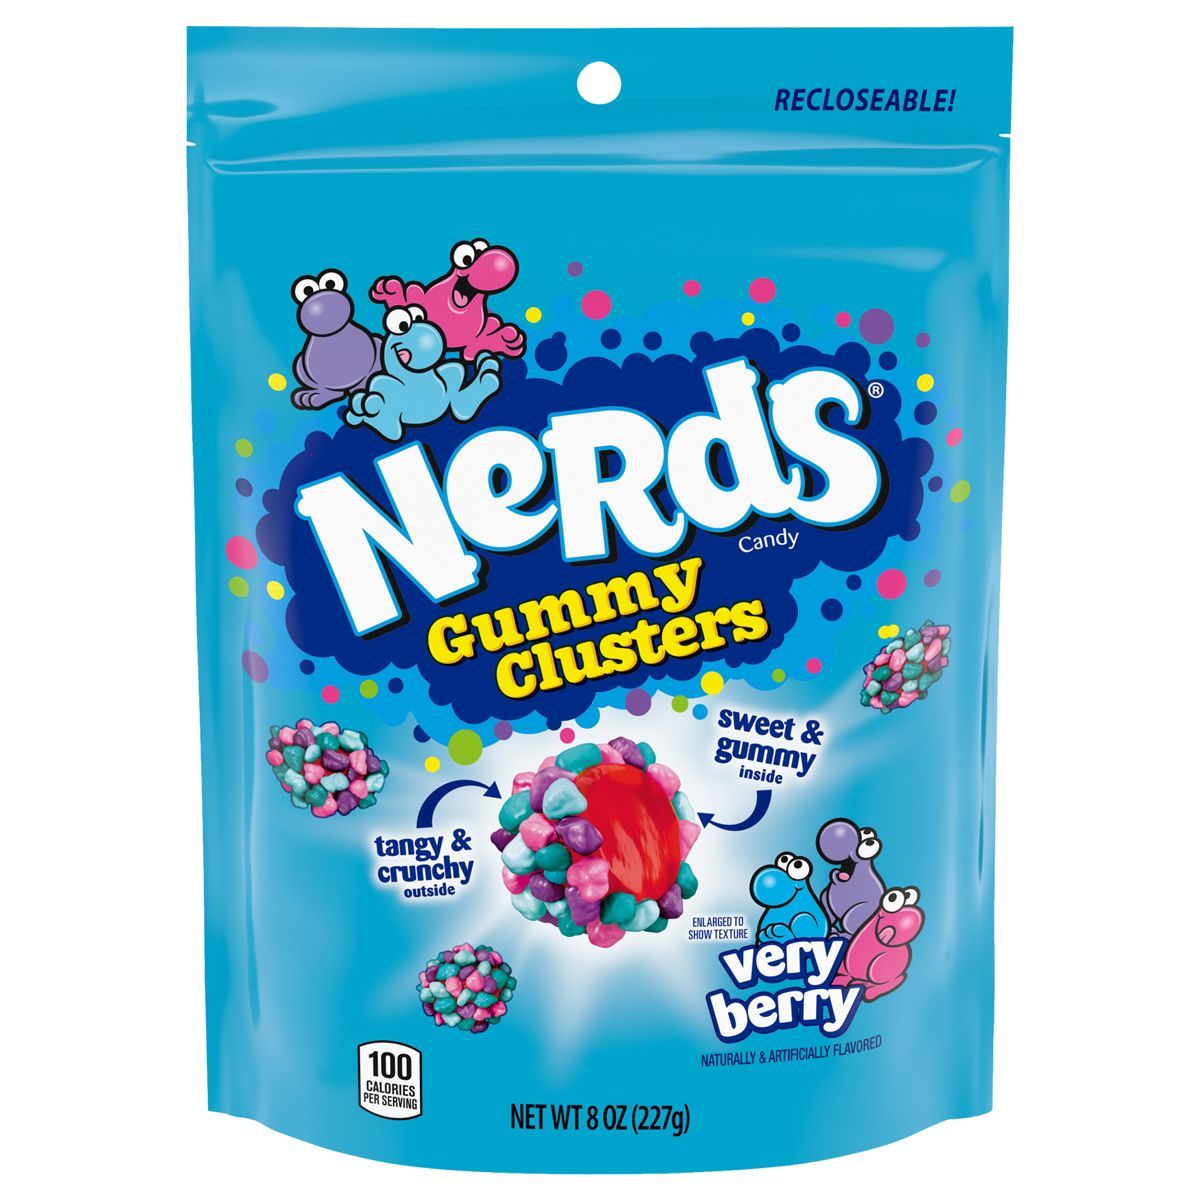 Nerds Candy Gummy Clusters - 8oz | Target